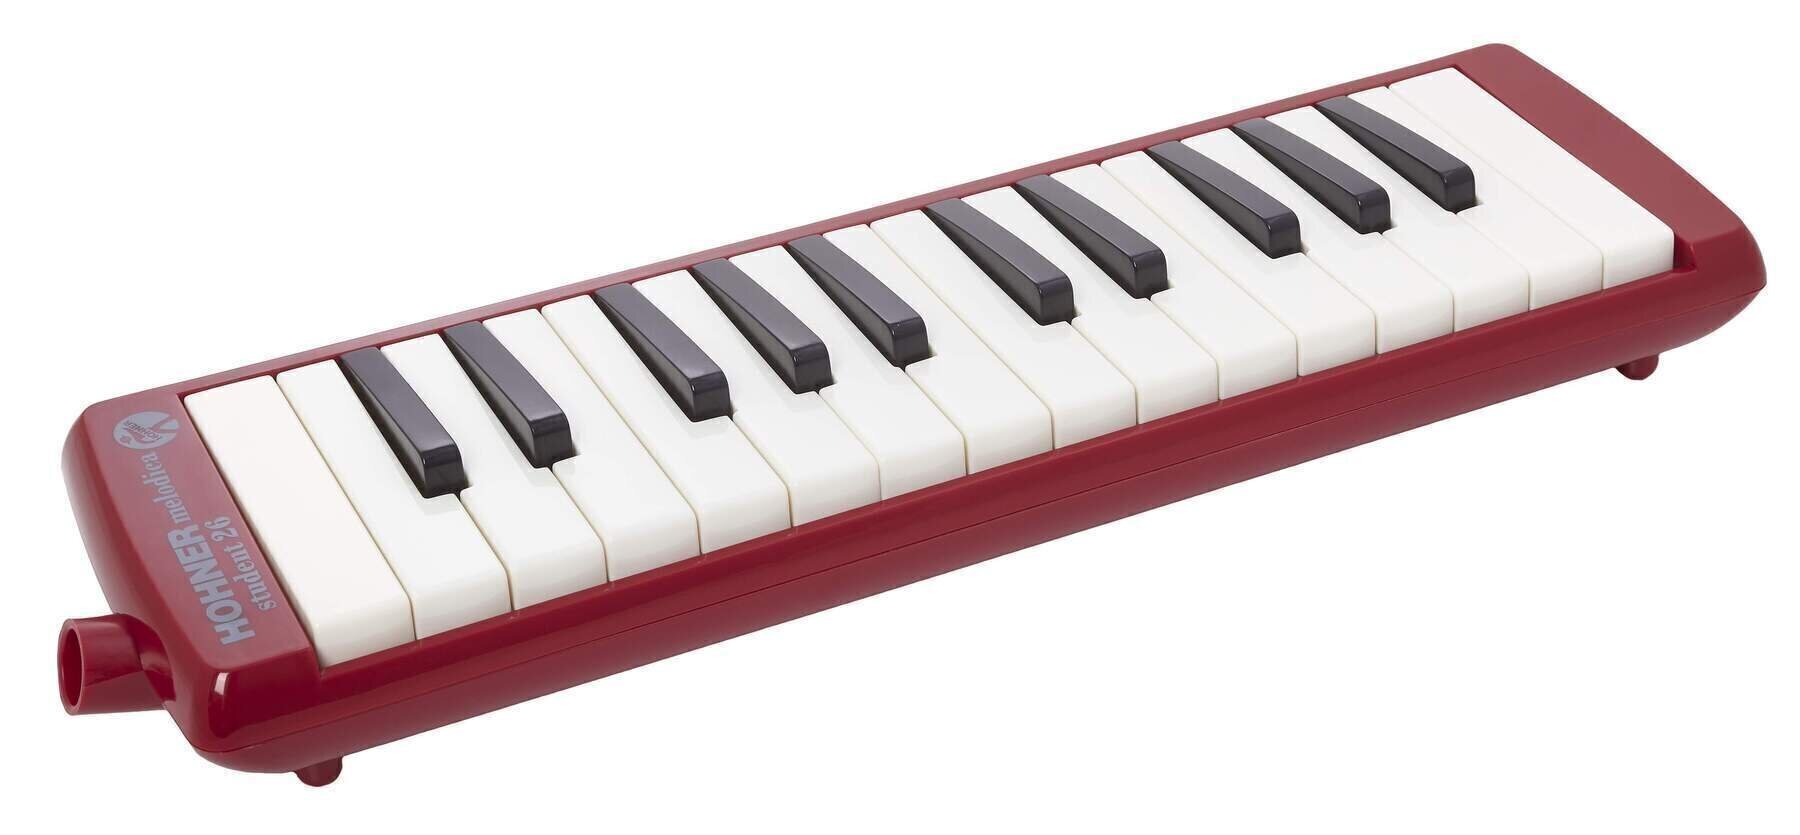 Melodica Hohner Student 26 Melodica Rot